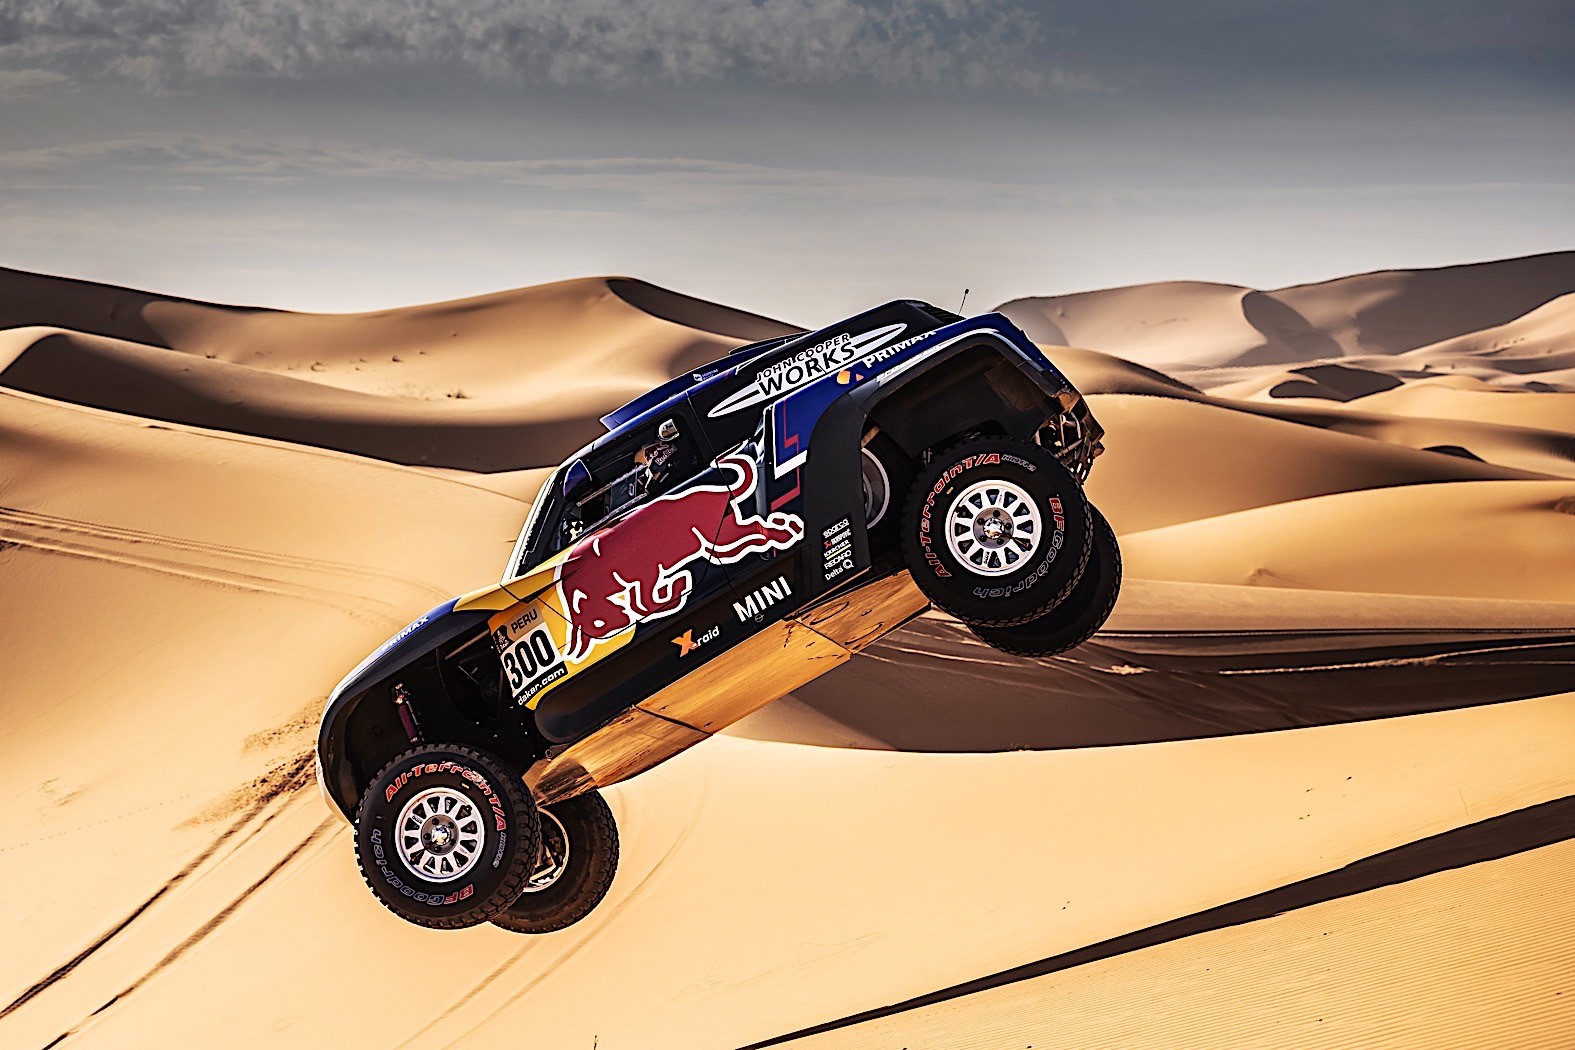 John Cooper Works buggies, which they will be driving as part of the X-raid... 